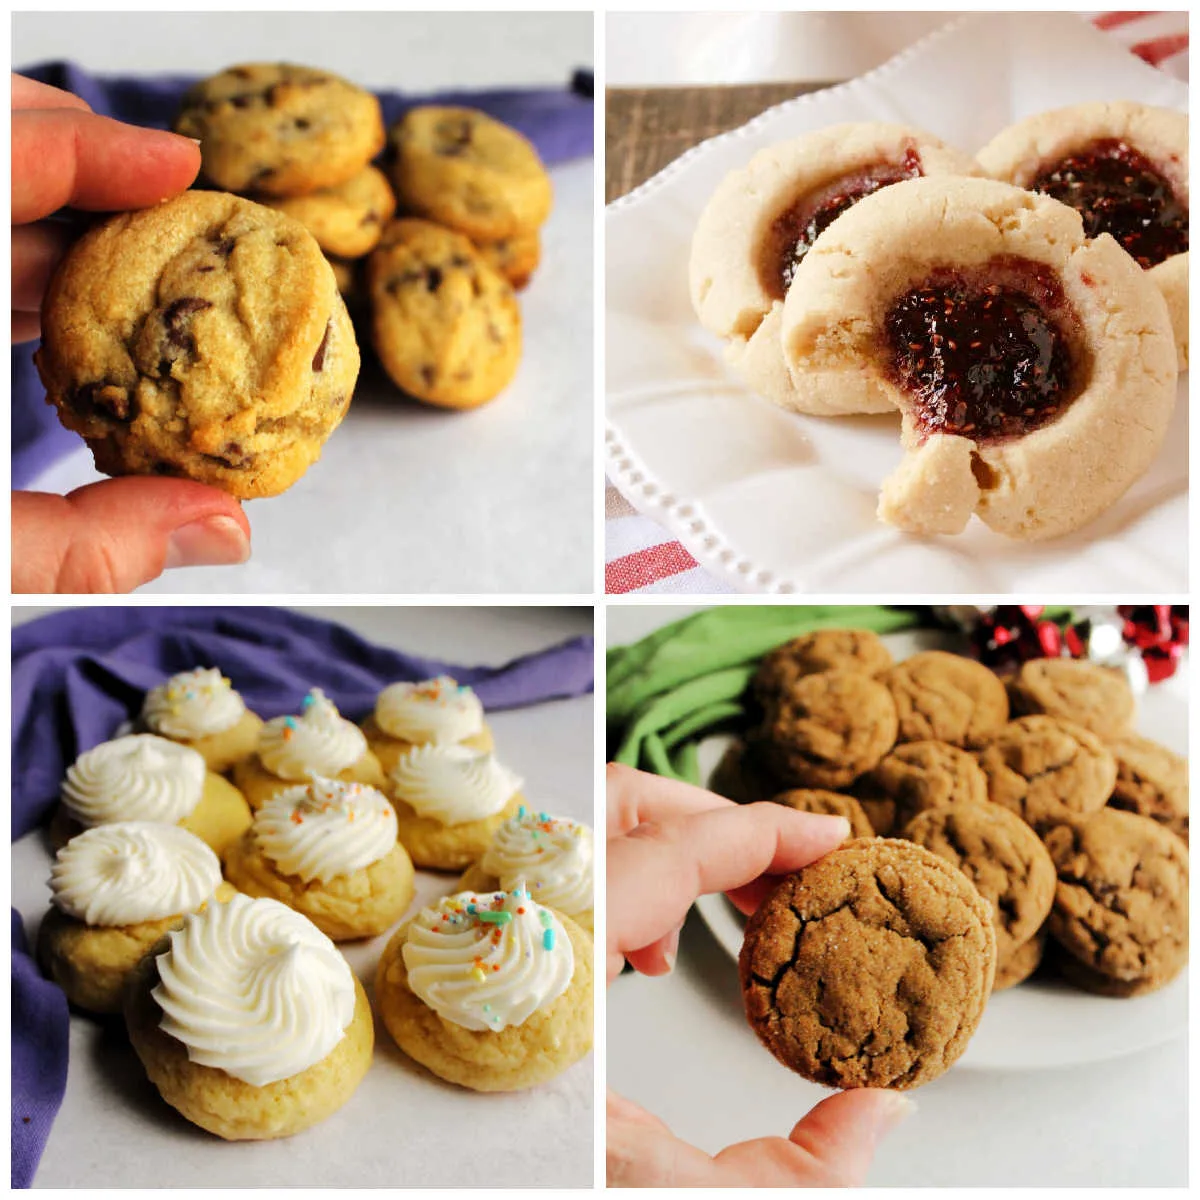 Collage of cookie images including thumbprints, chocolate chip cookies, sour cream cookies and spiced molasses cookies.